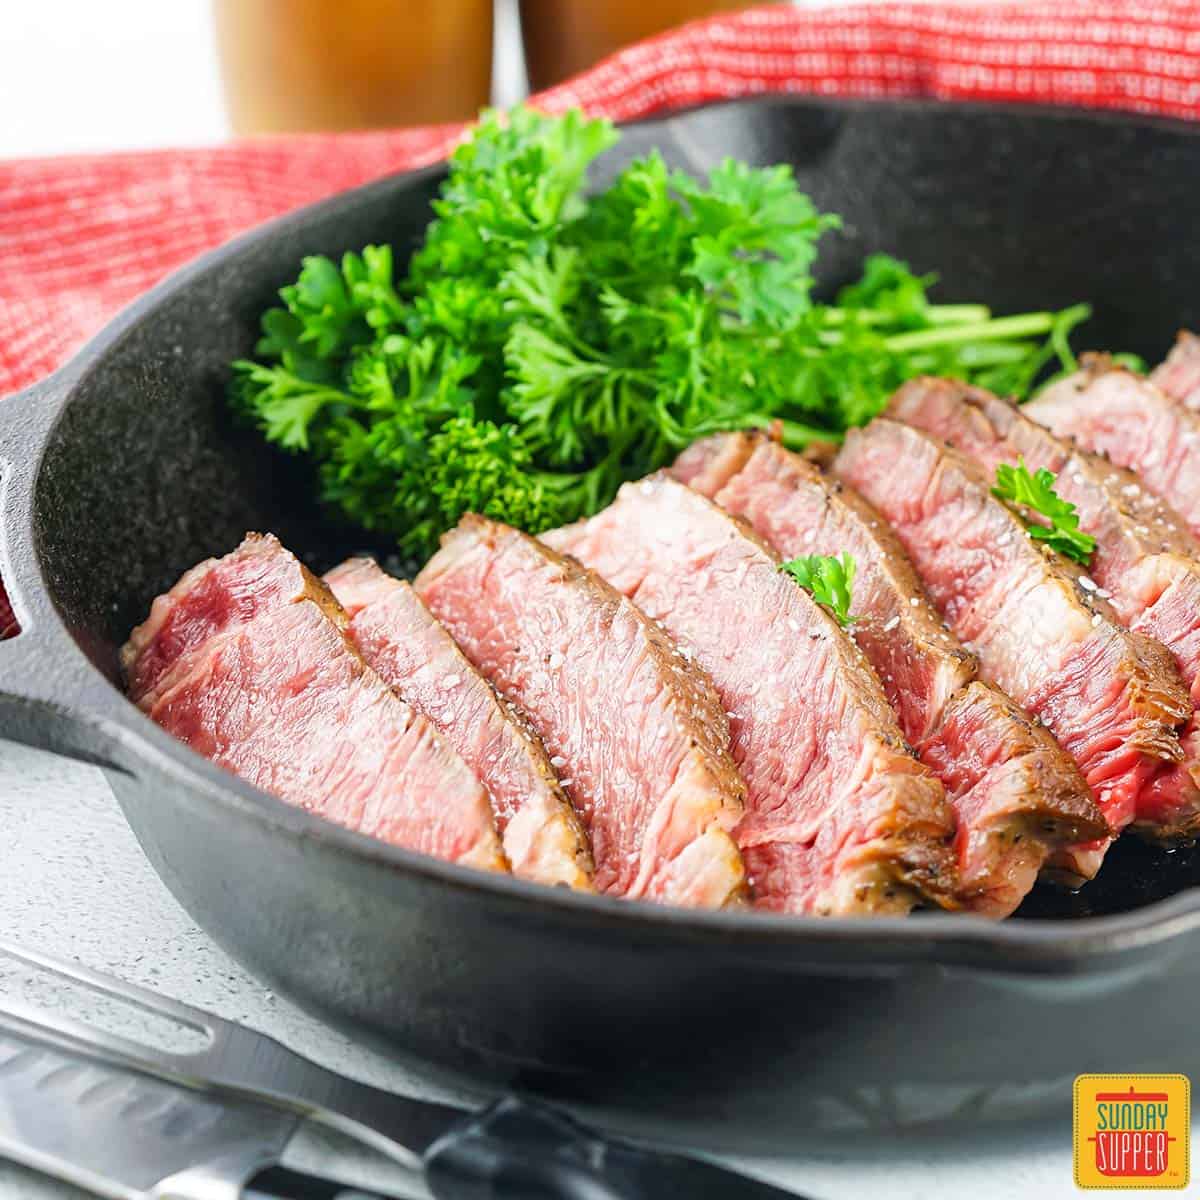 slices of sous vide ribeye steak next to fresh herbs in a cast iron pan